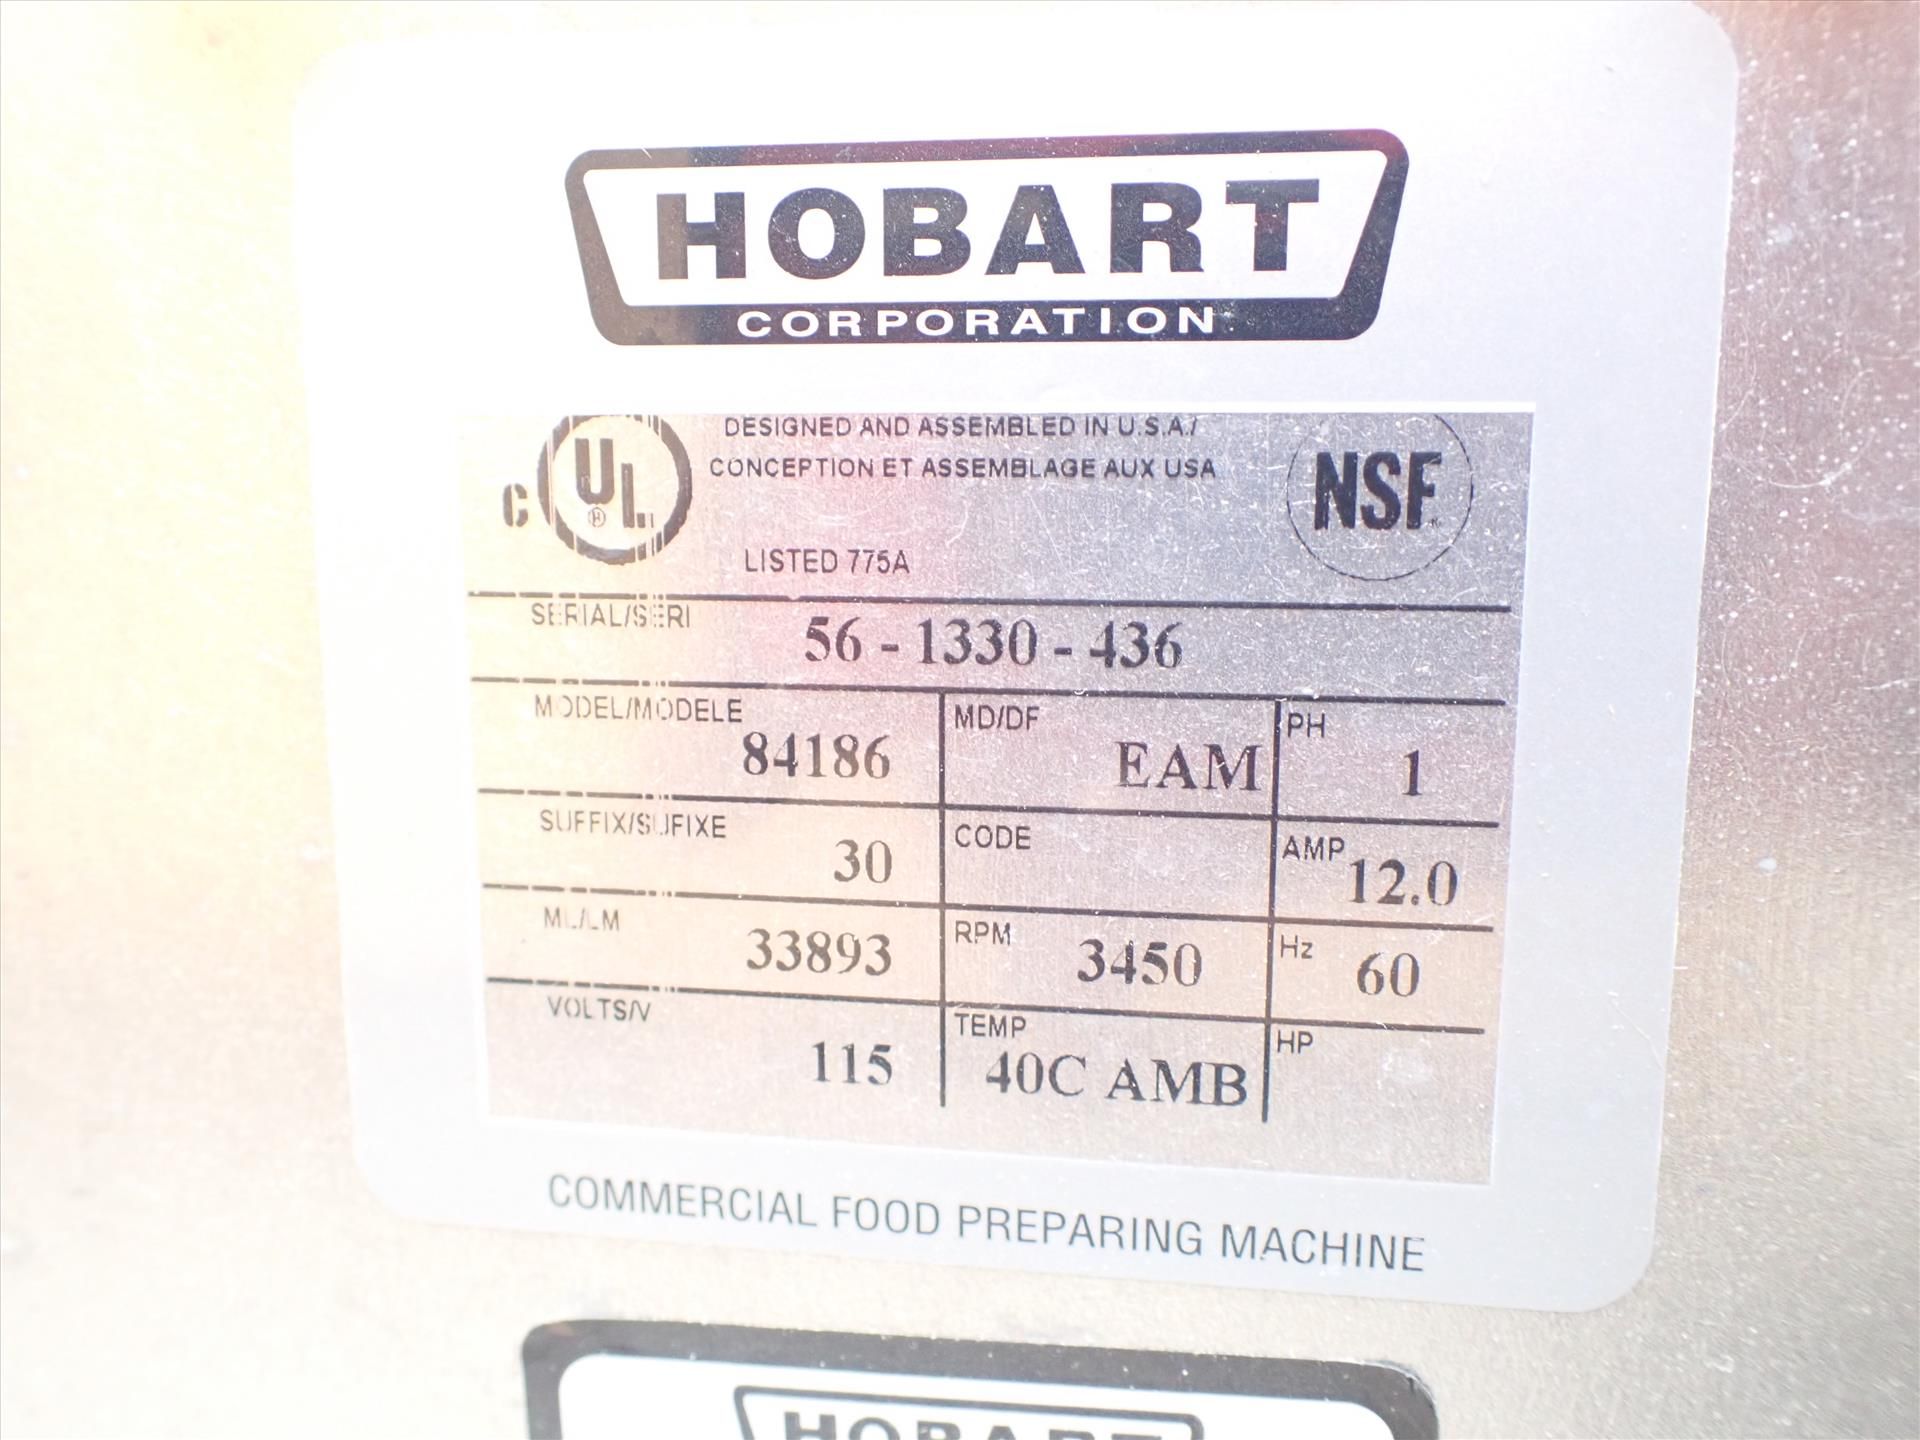 Hobart bowl cutter, mod. 84186, ser. no. 56-1330-436, 1 hp (2019 NEW in box) - Image 3 of 3